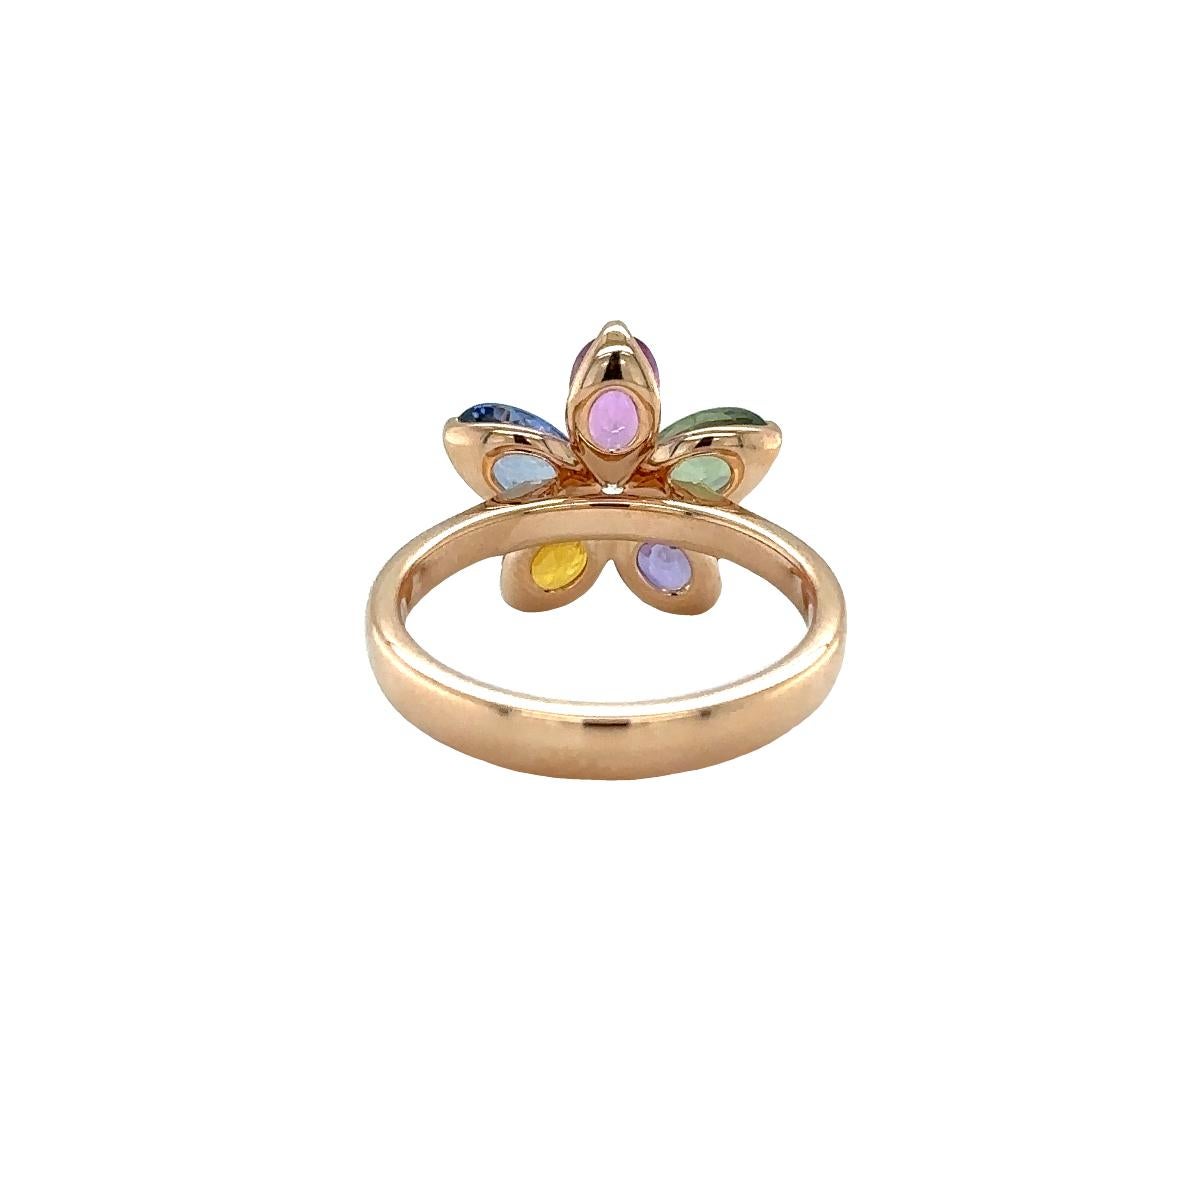 The RIAD Ring is crafted in 18Kt rose gold, weighing 4.77 grams. It features stunning Oval Colored Sapphires with a total carat weight of 2.83, and is accentuated by Diamonds with a G color grade and VS clarity, totaling 0.05 carats.

The RIAD Ring